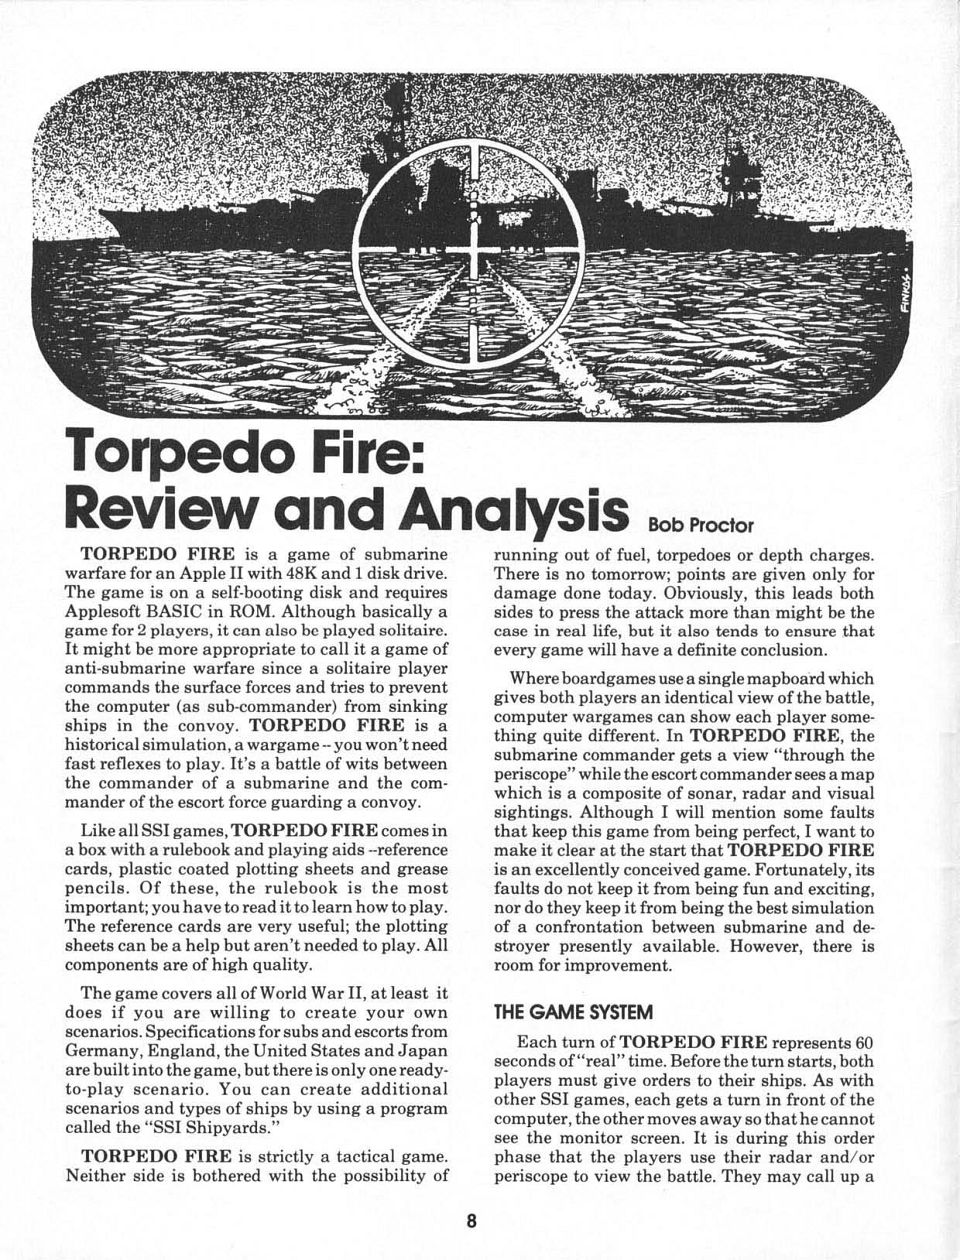 Torpedo Fire: Review and Analysis